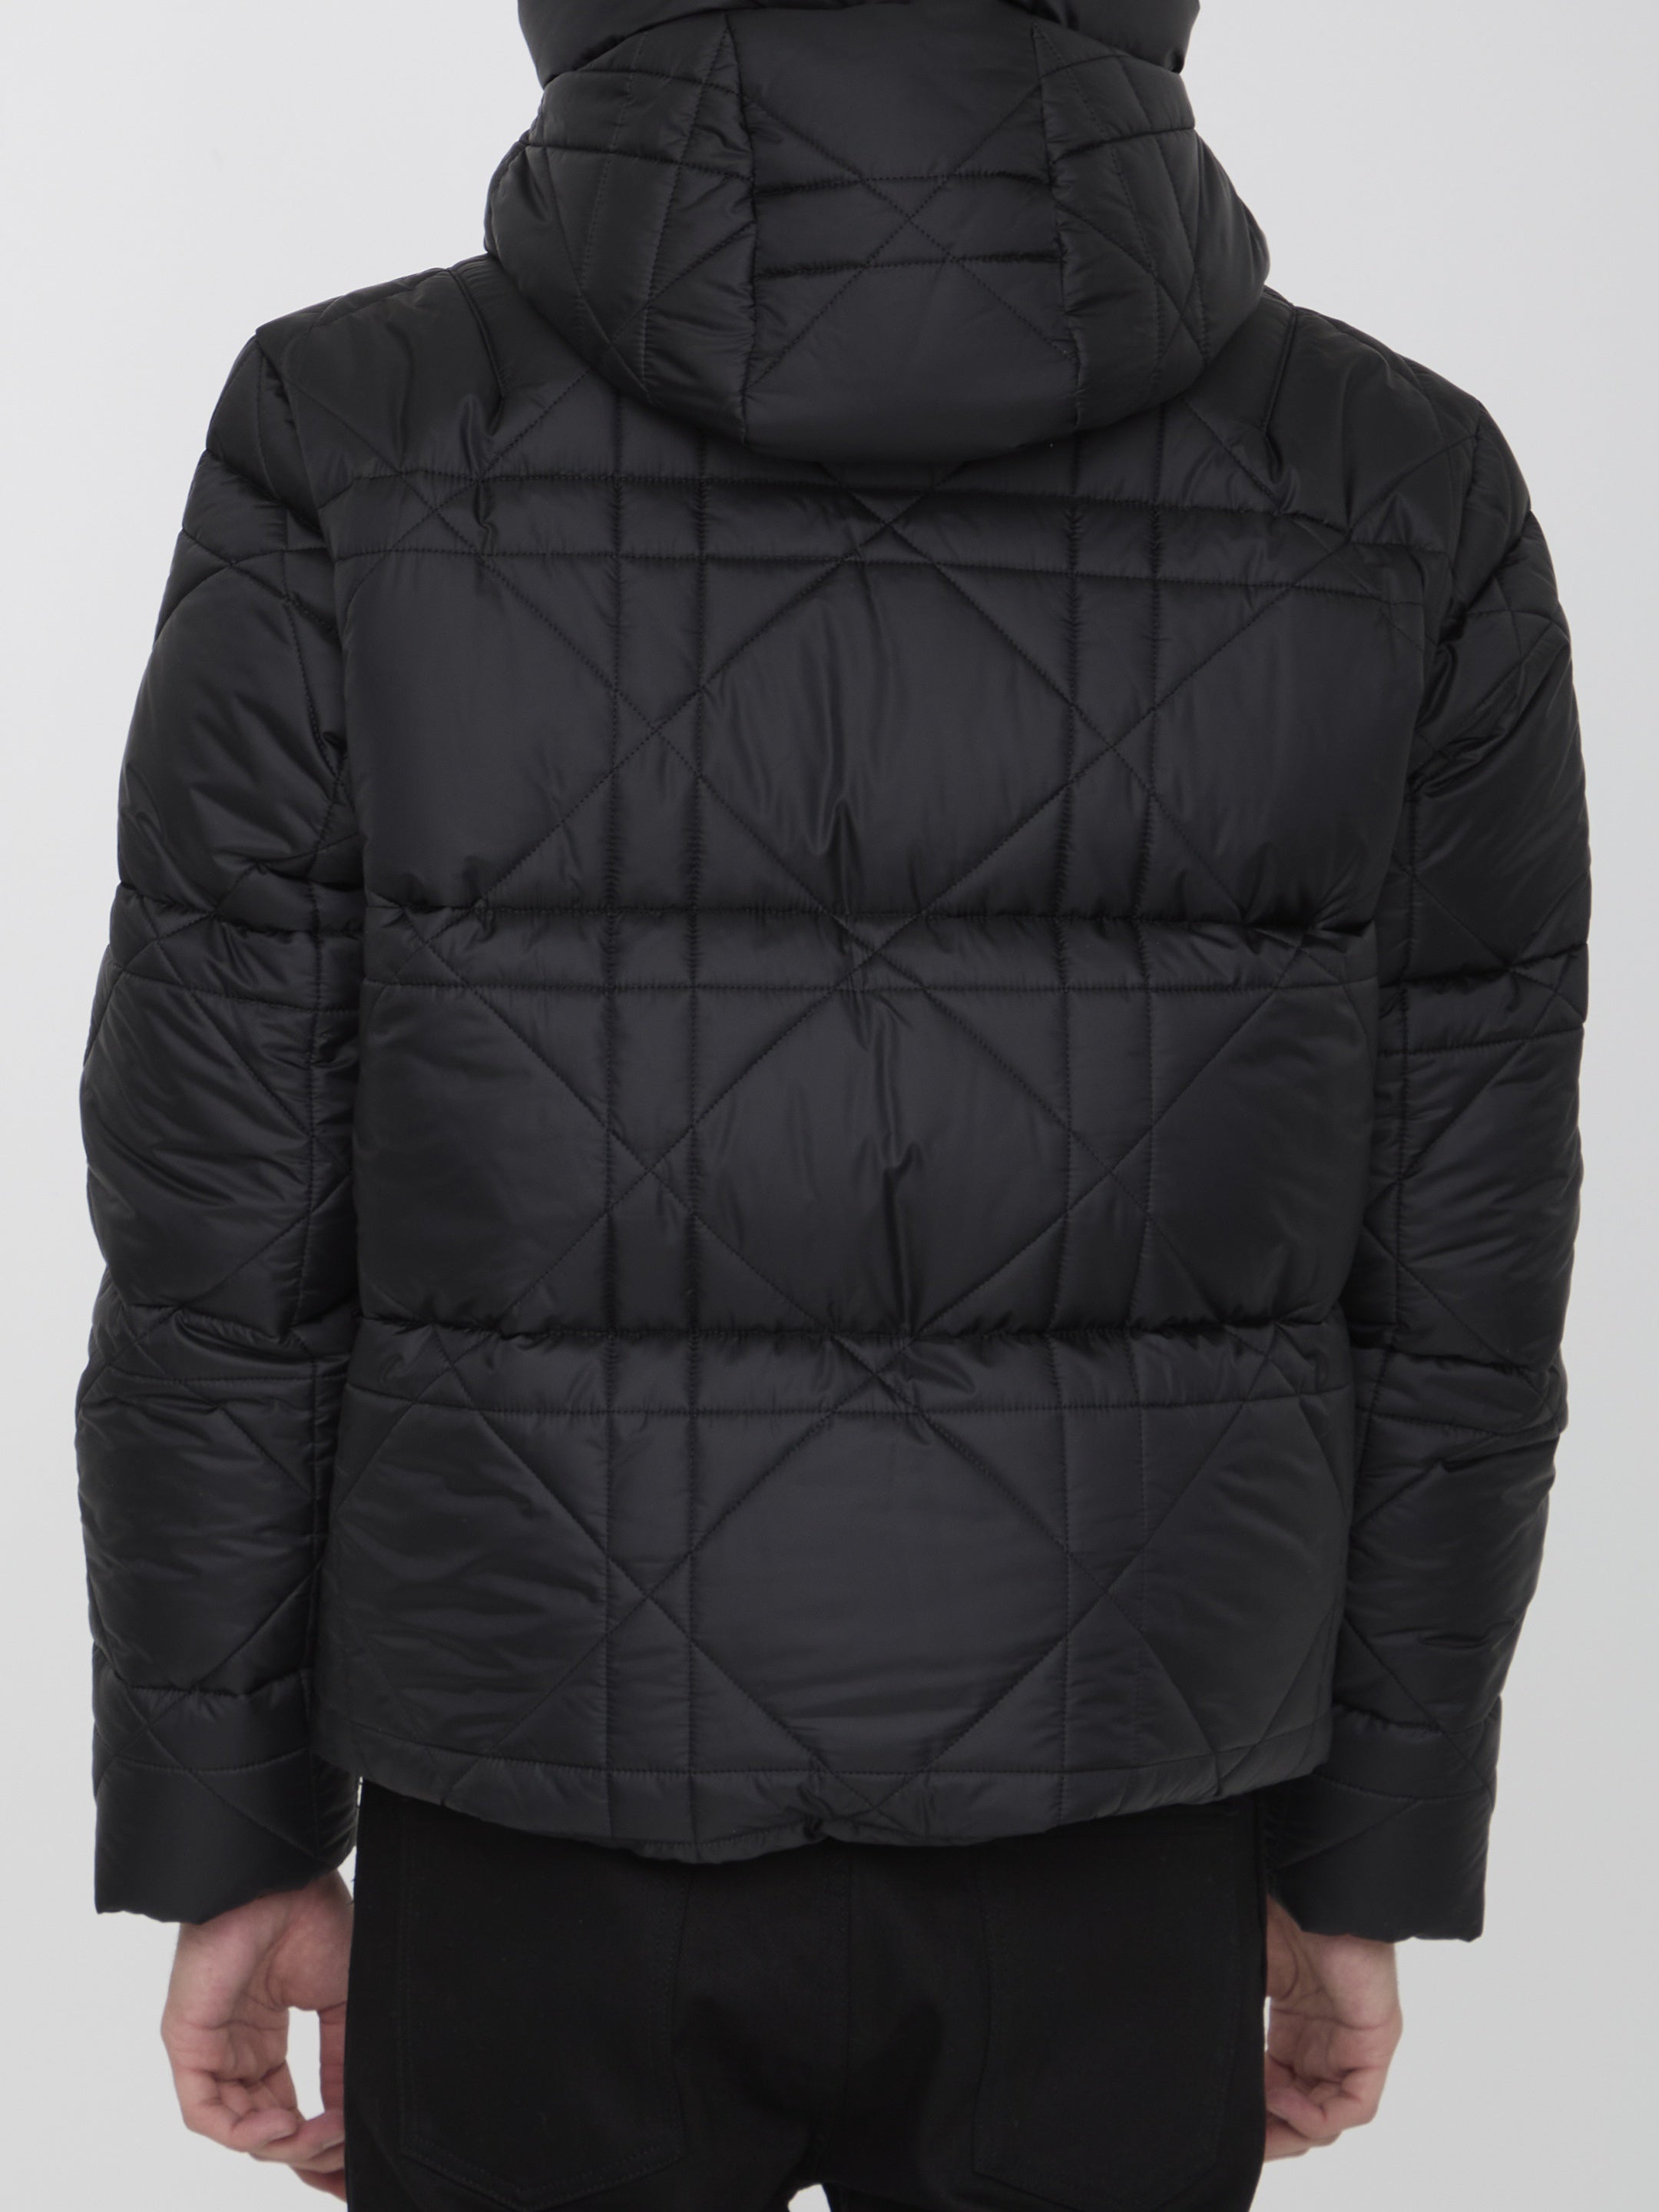 DIOR-HOMME-OUTLET-SALE-Cannage-puffer-jacket-Jacken-Mantel-50-BLACK-ARCHIVE-COLLECTION-4.jpg